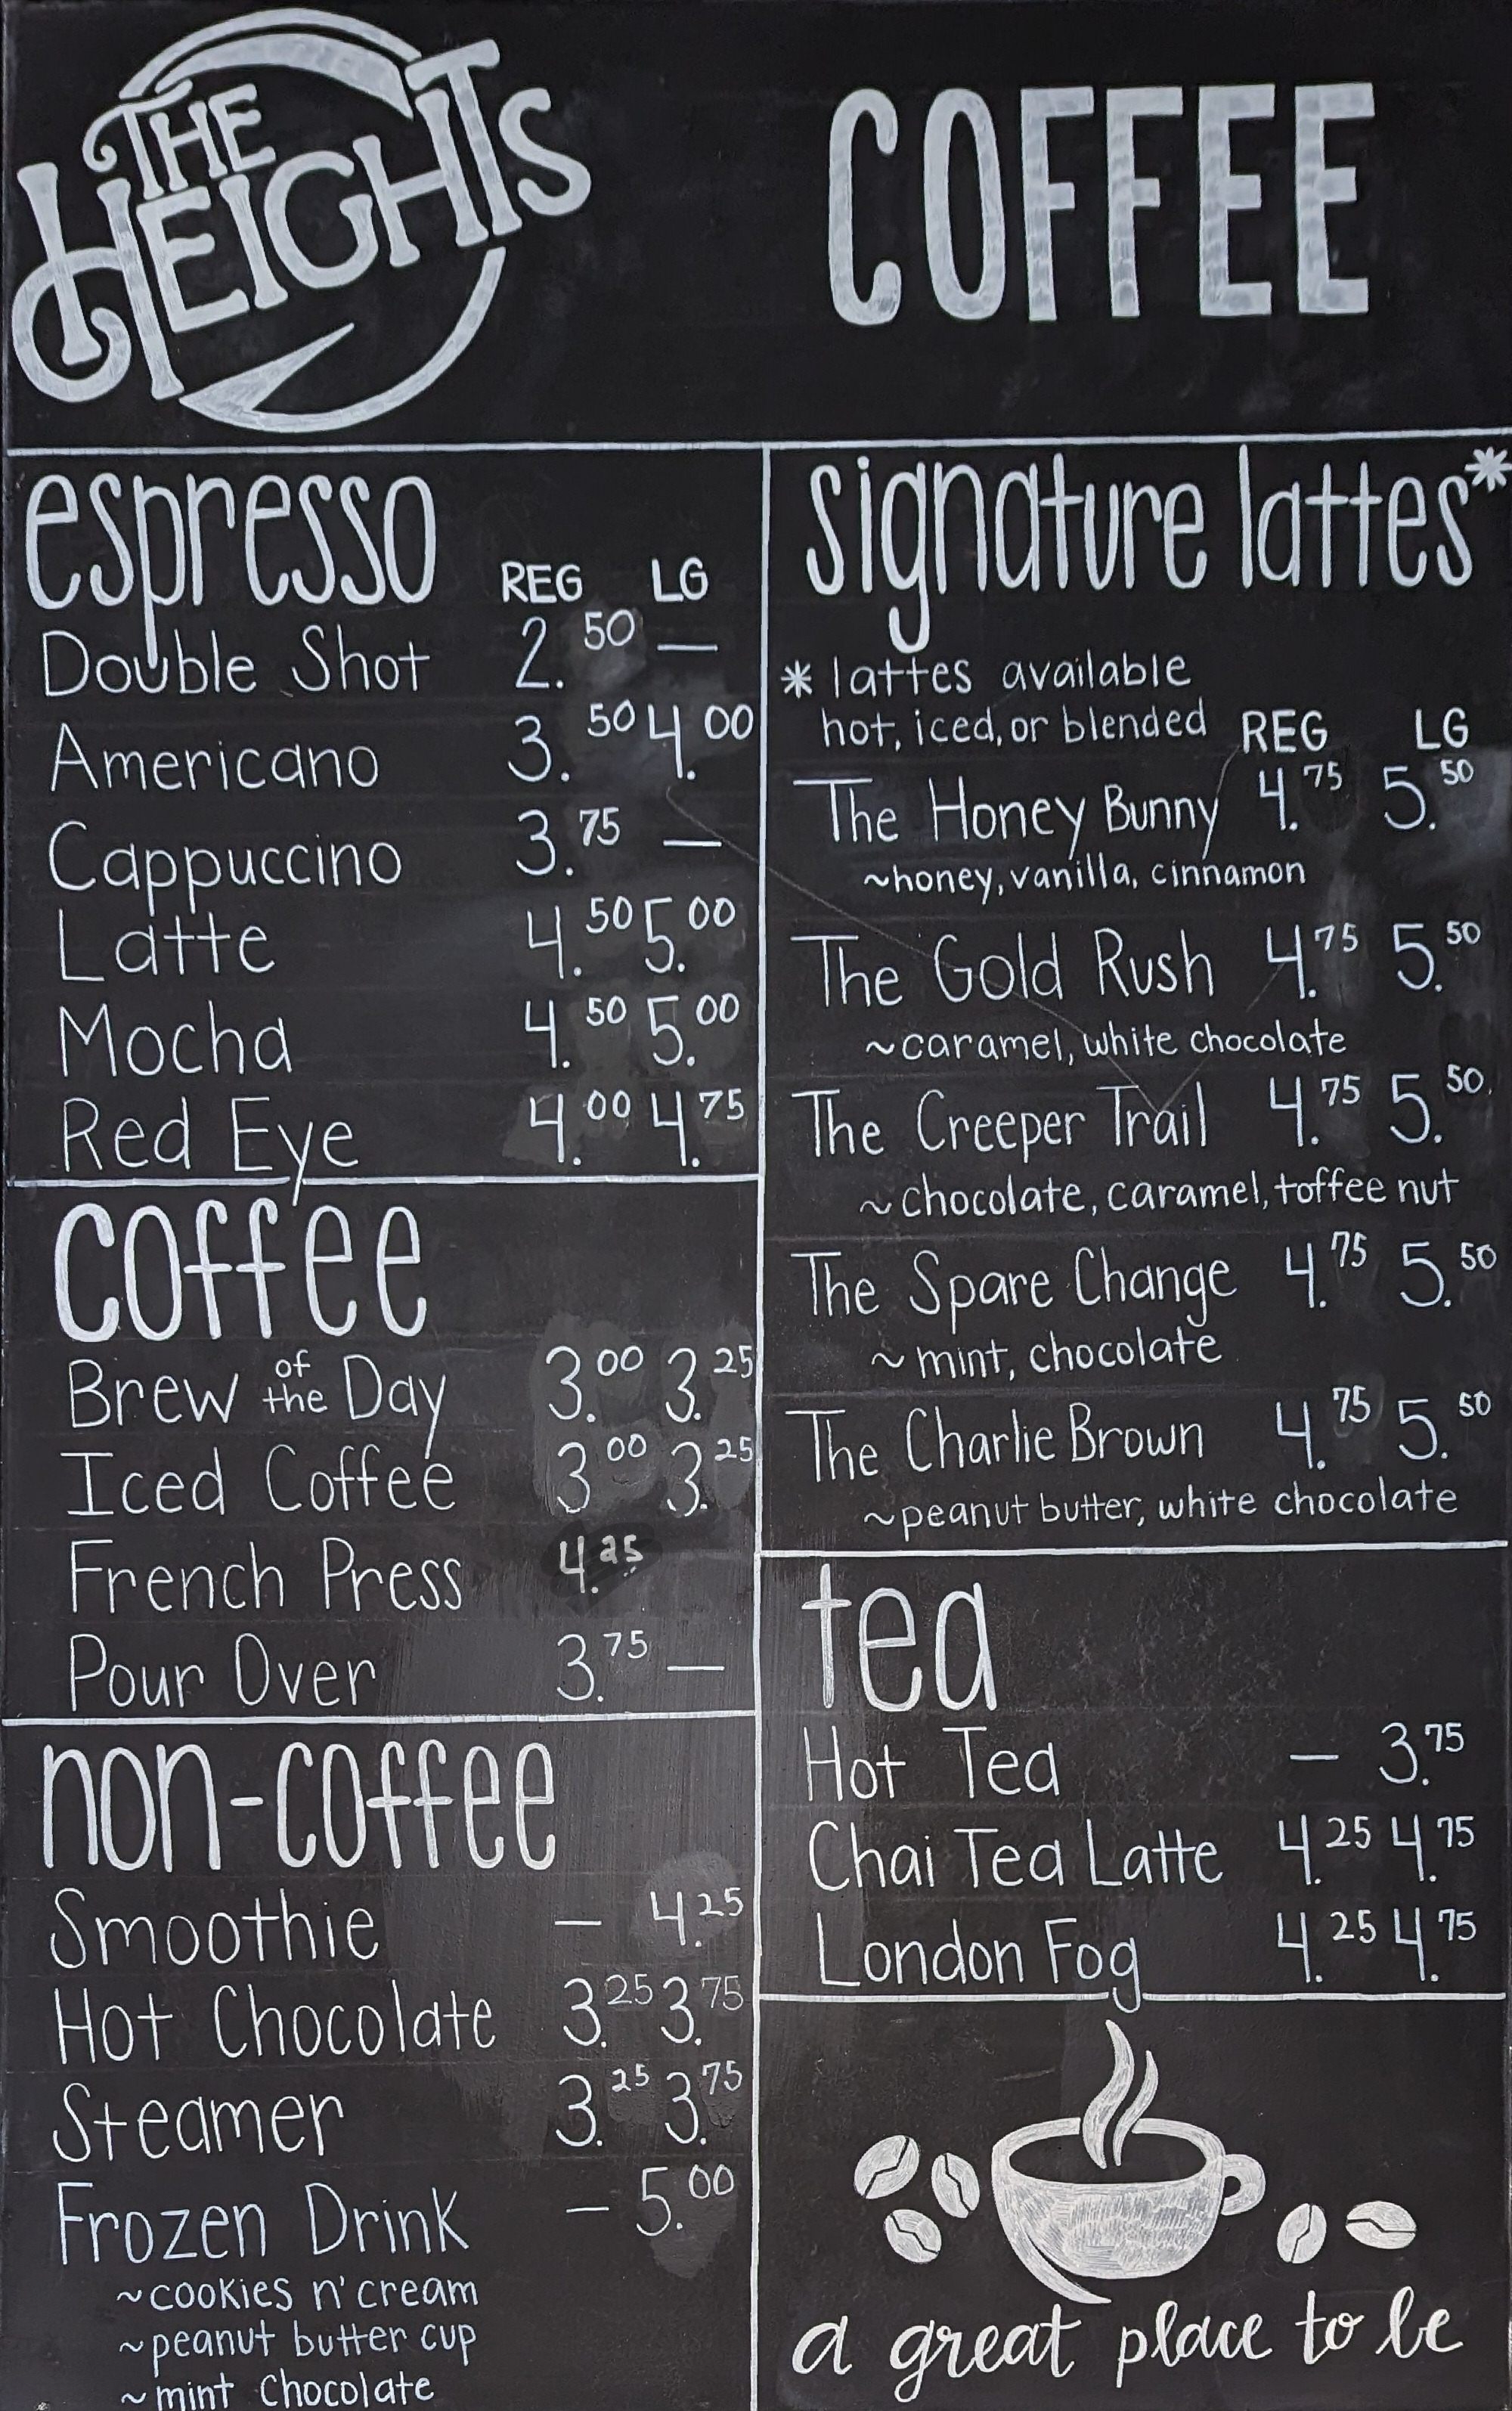 Coffee Shop menu at The Heights